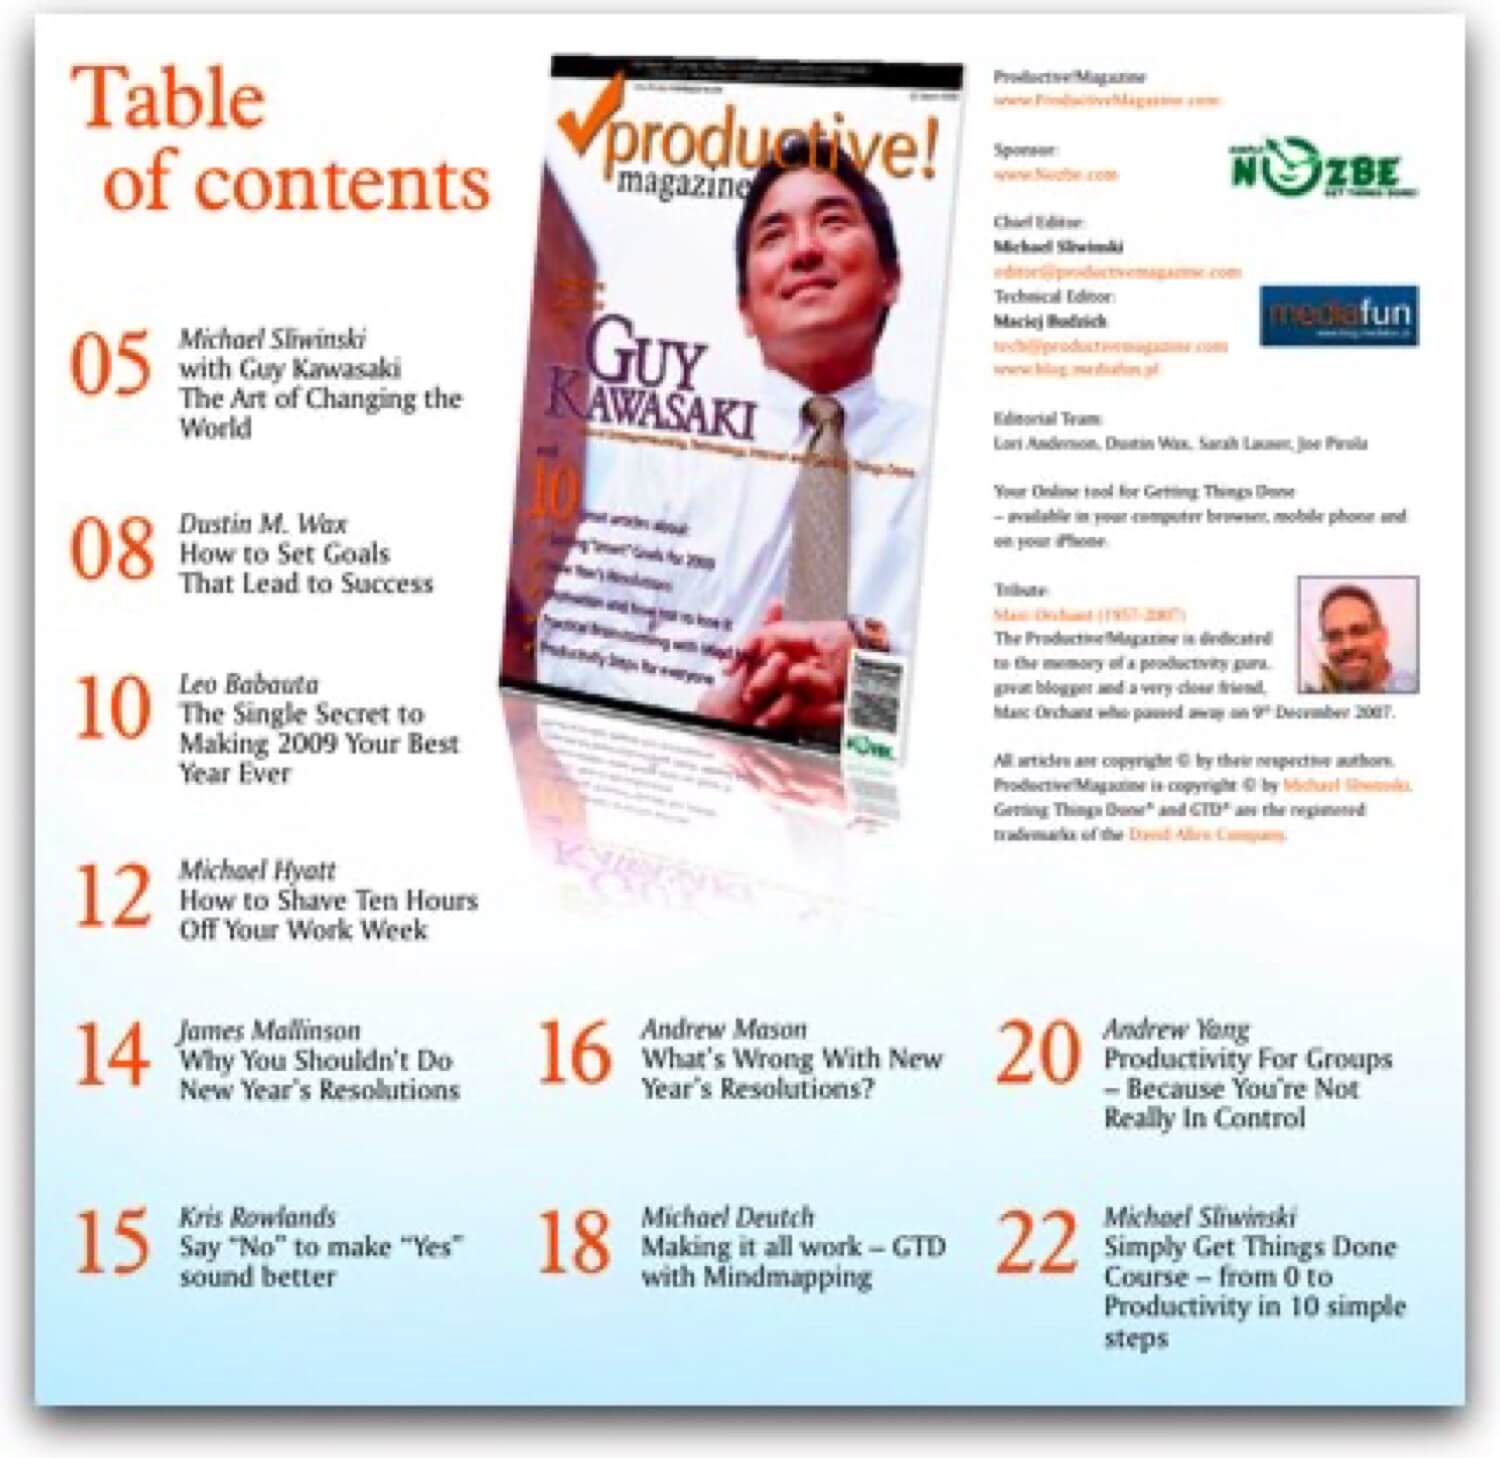 Get your Productive Magazine 2 with Guy Kawasaki and 10 great articles Table Of Contents